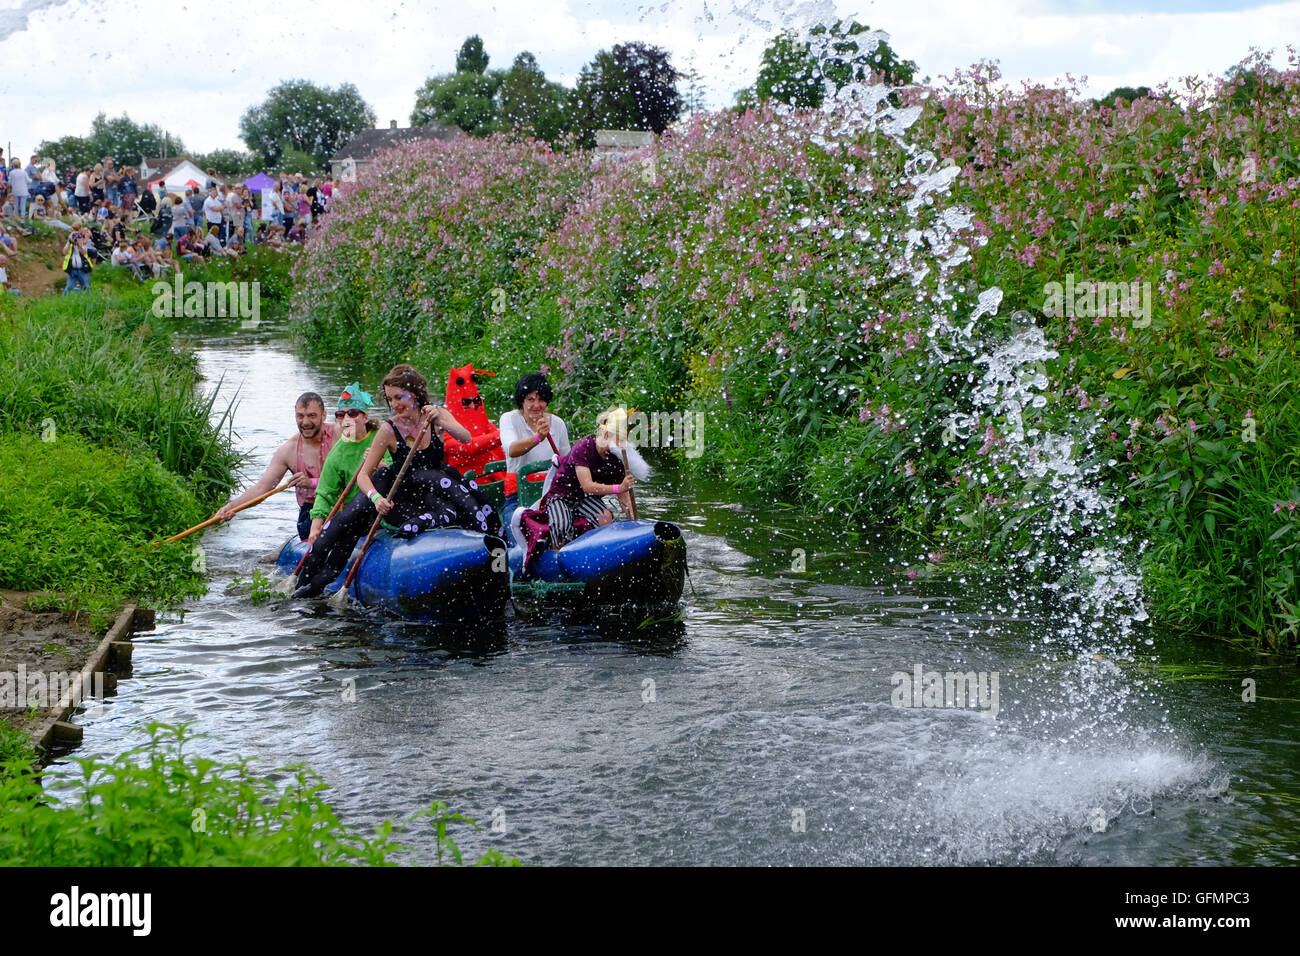 Lowland Games, Thorney, Somerset, UK. 31st July, 2016. Competitors take part in the annual Lowland Games Raft Race on the River Parrett in Somerset. Hundreds turned out in the heat to watch the Lowland Games which includes such events as Hay Bale Racing, Wife Carrying, River its a Knock Out, Mud Wrestling, and Chunder Challenge. The games, originally started in 1984, are held annually in the Lowland village of Thorney which became flooded for the first time in centuries during the Somerset floods in January 2014 Credit:  Tom Corban/Alamy Live News Stock Photo